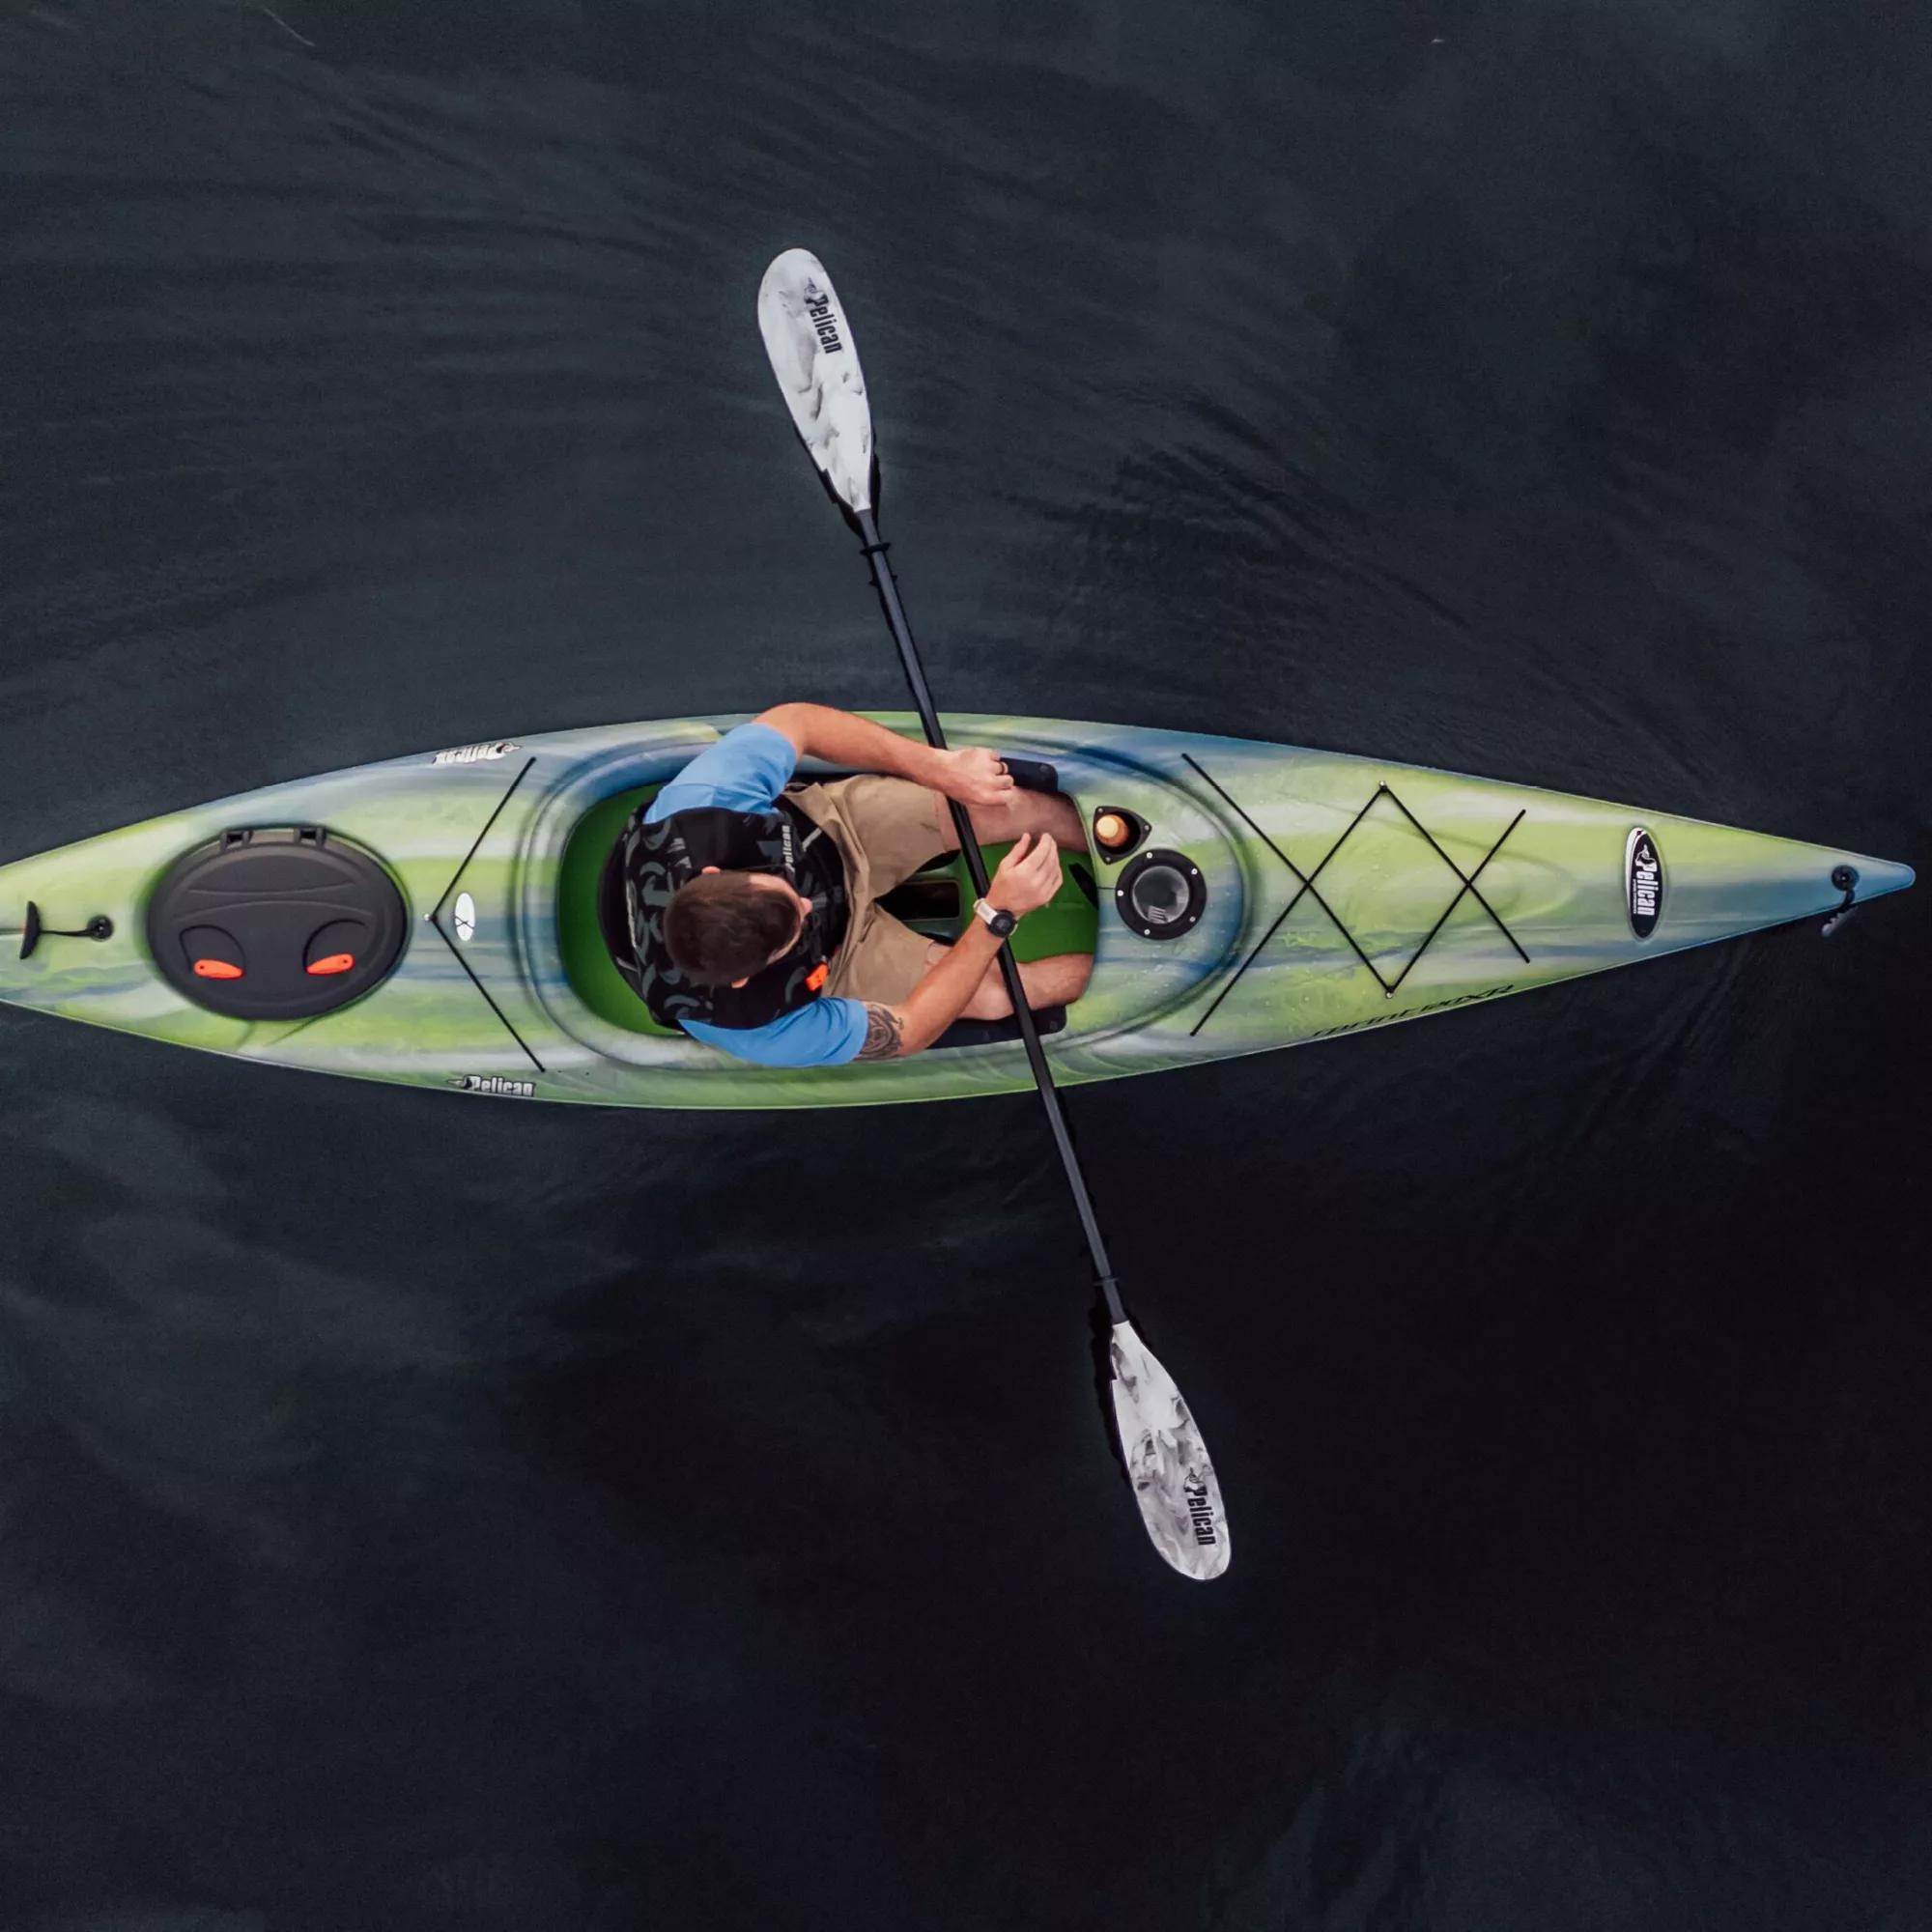 PELICAN - Sprint 120XR Performance Kayak - Discontinued color/model - Yellow - KNP12P100-00 - LIFE STYLE 2